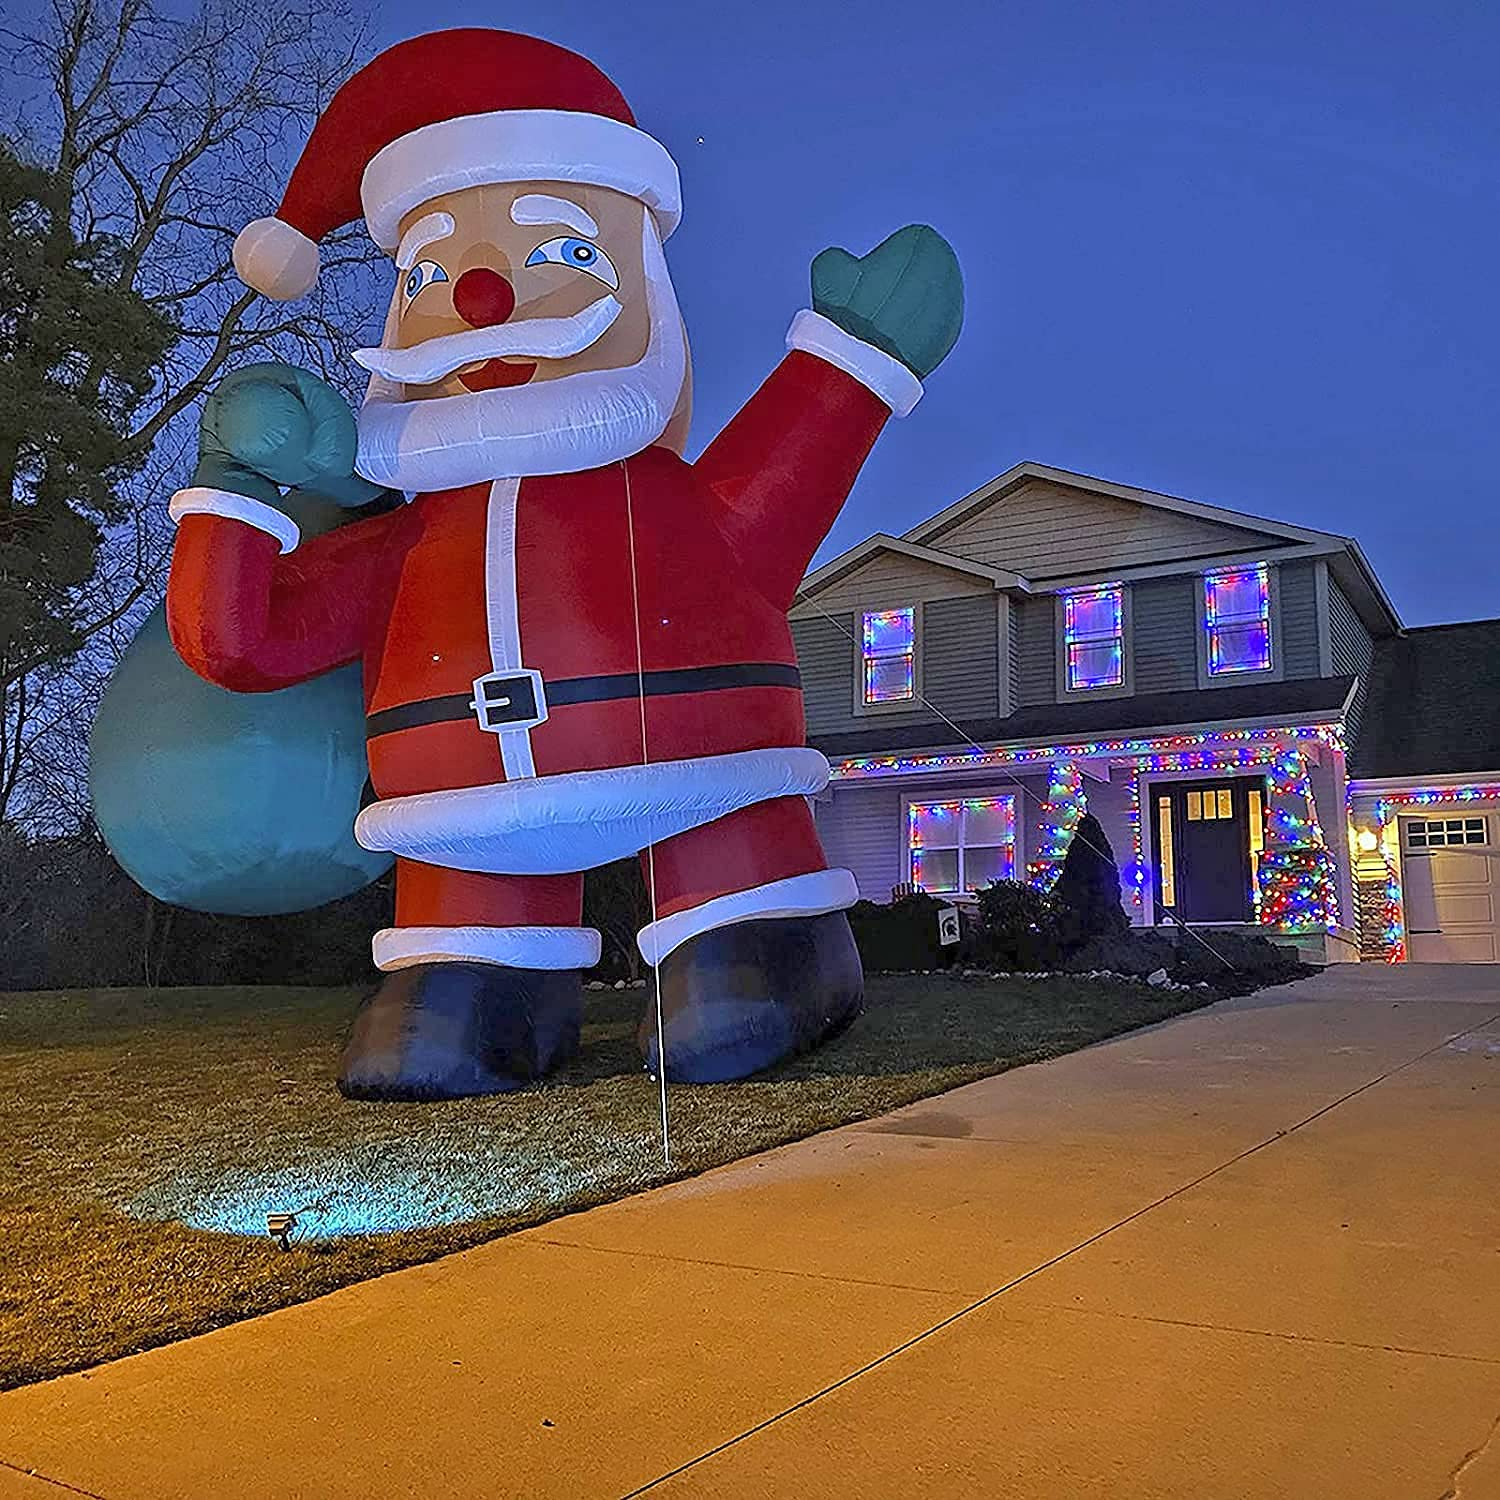 Giant 33Ft Premium Inflatable Santa Claus with Blower for Christmas Yard Decoration Outdoor Yard Lawn Xmas Party Blow Up Decoration with No Light